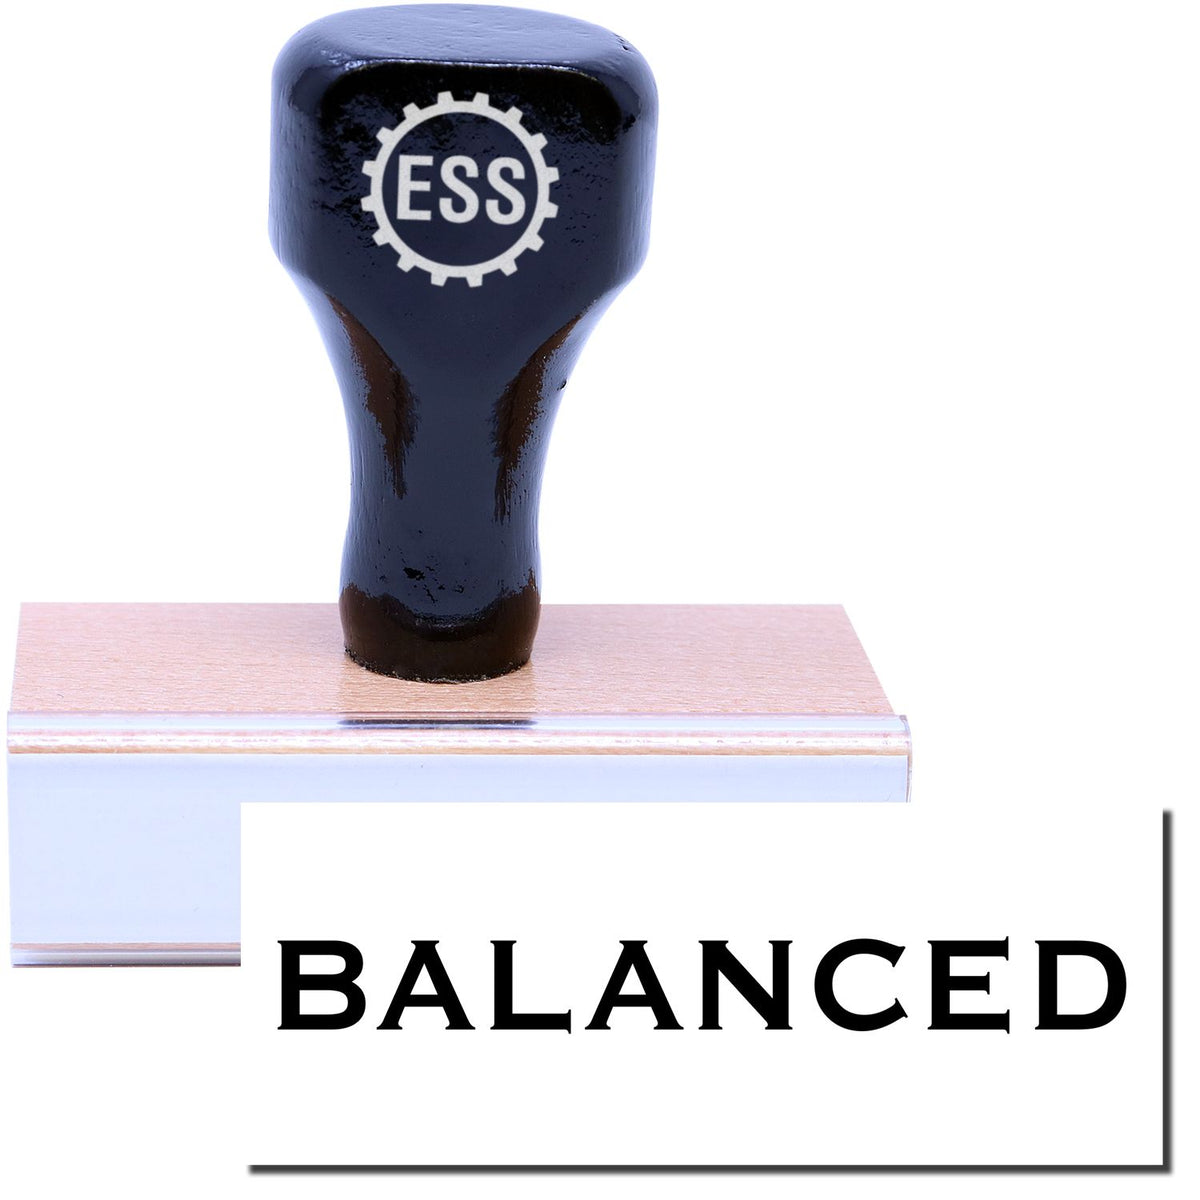 A stock office rubber stamp with a stamped image showing how the text &quot;BALANCED&quot; is displayed after stamping.